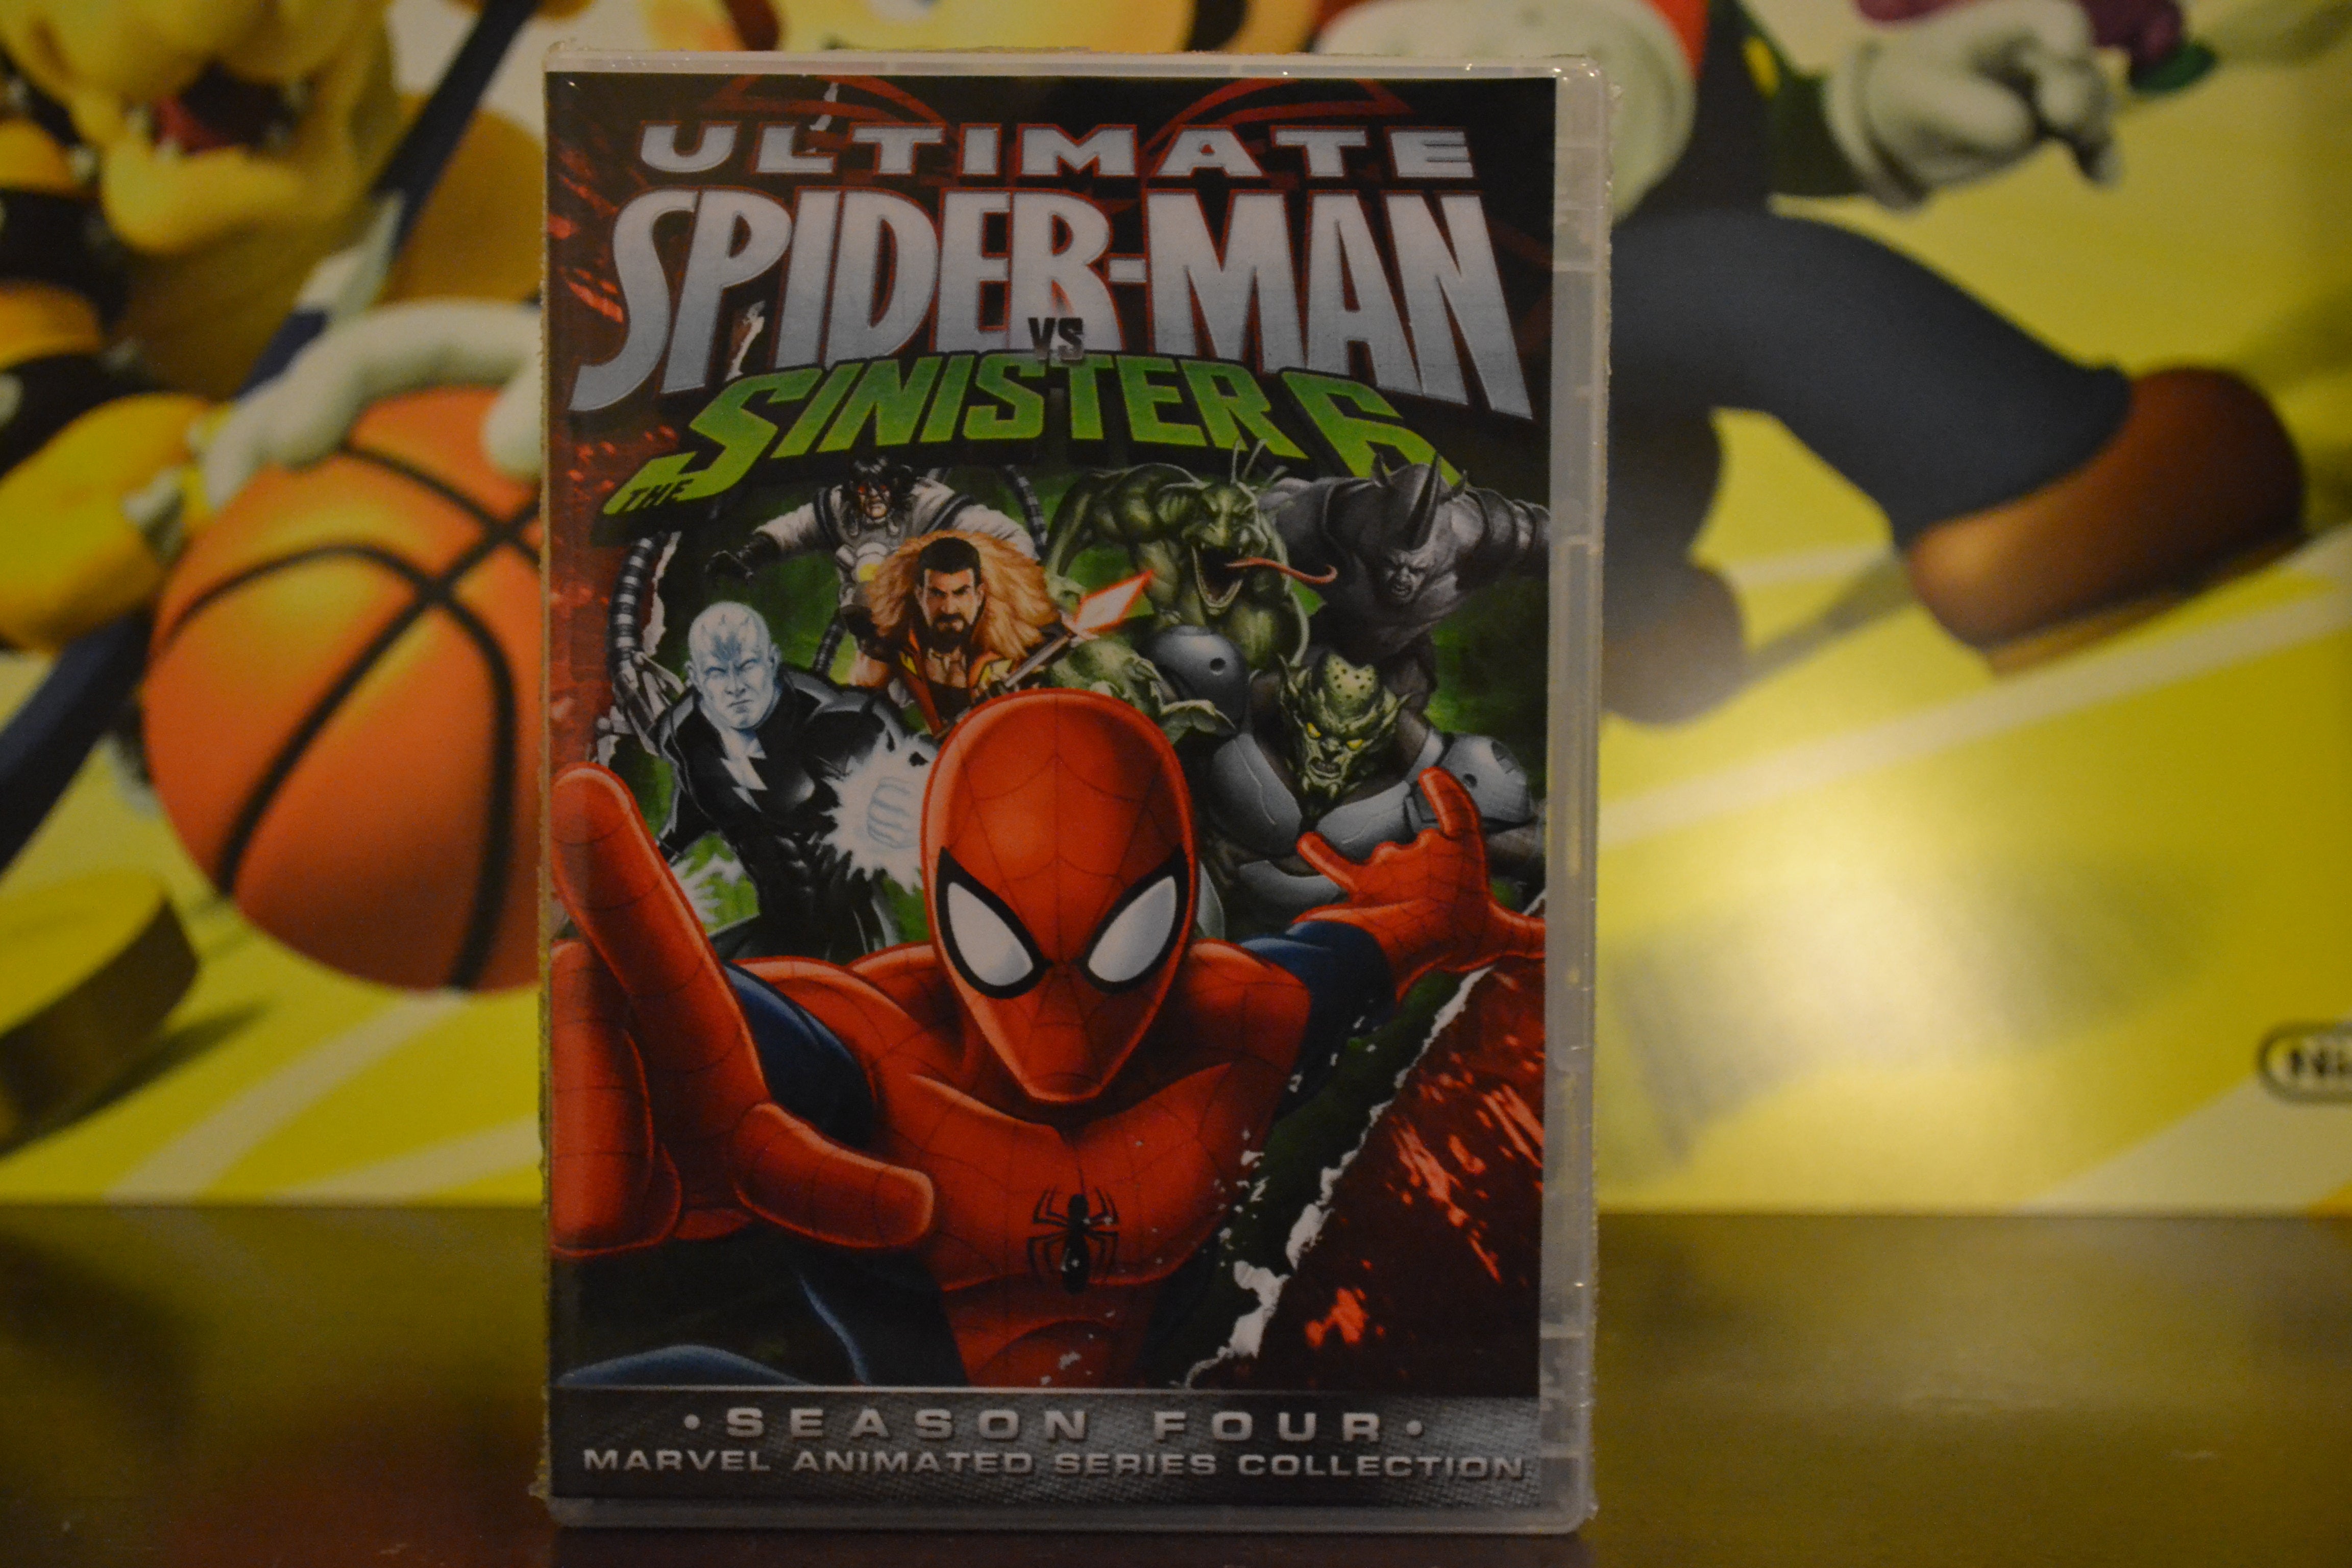 Ultimate Spider-Man The Complete Season 4 DvD Set